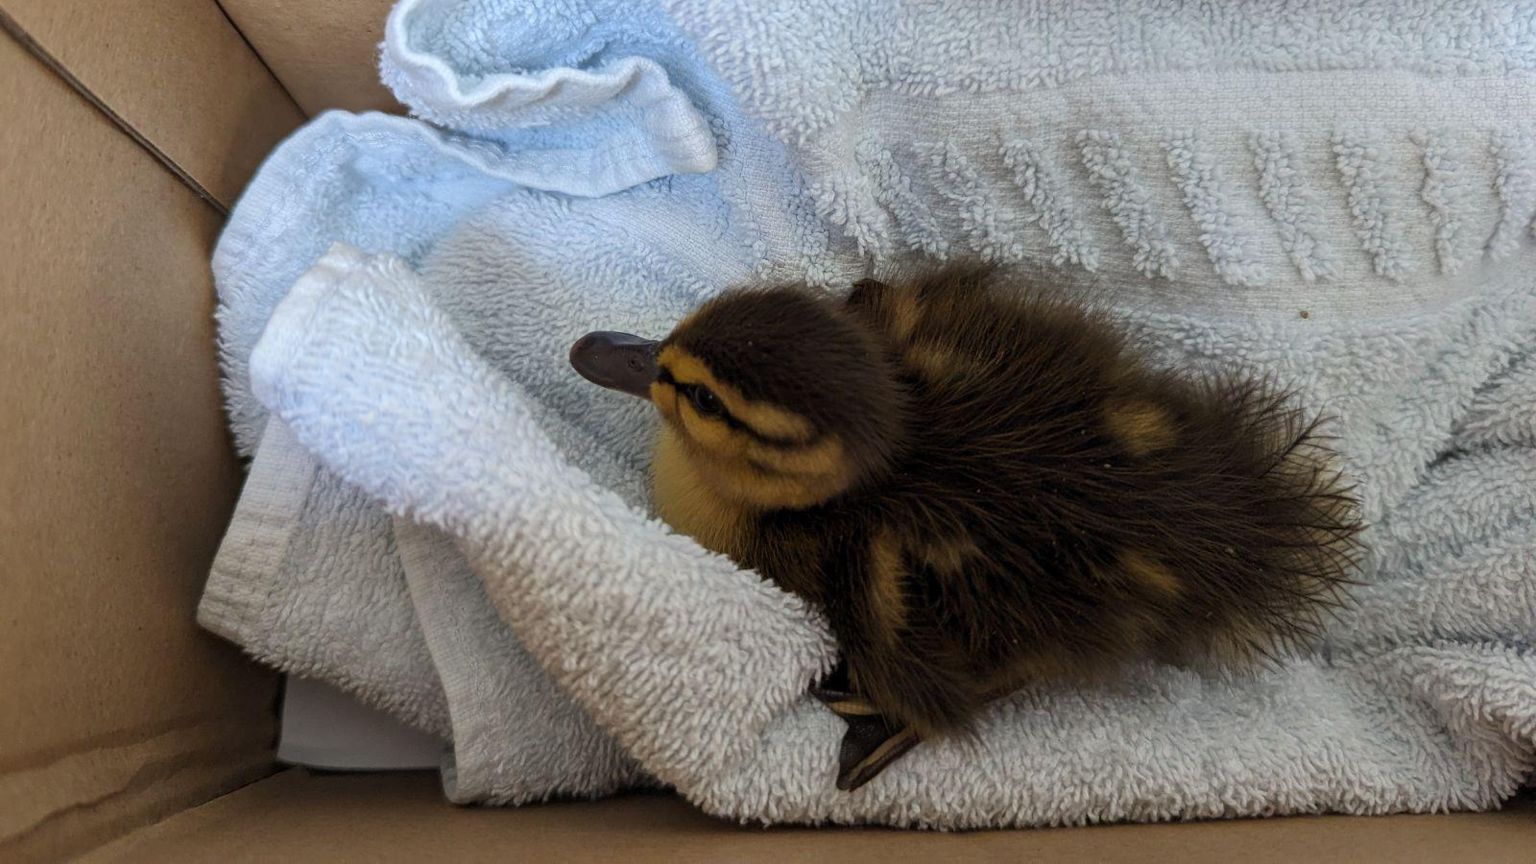 A rescued duck in a box